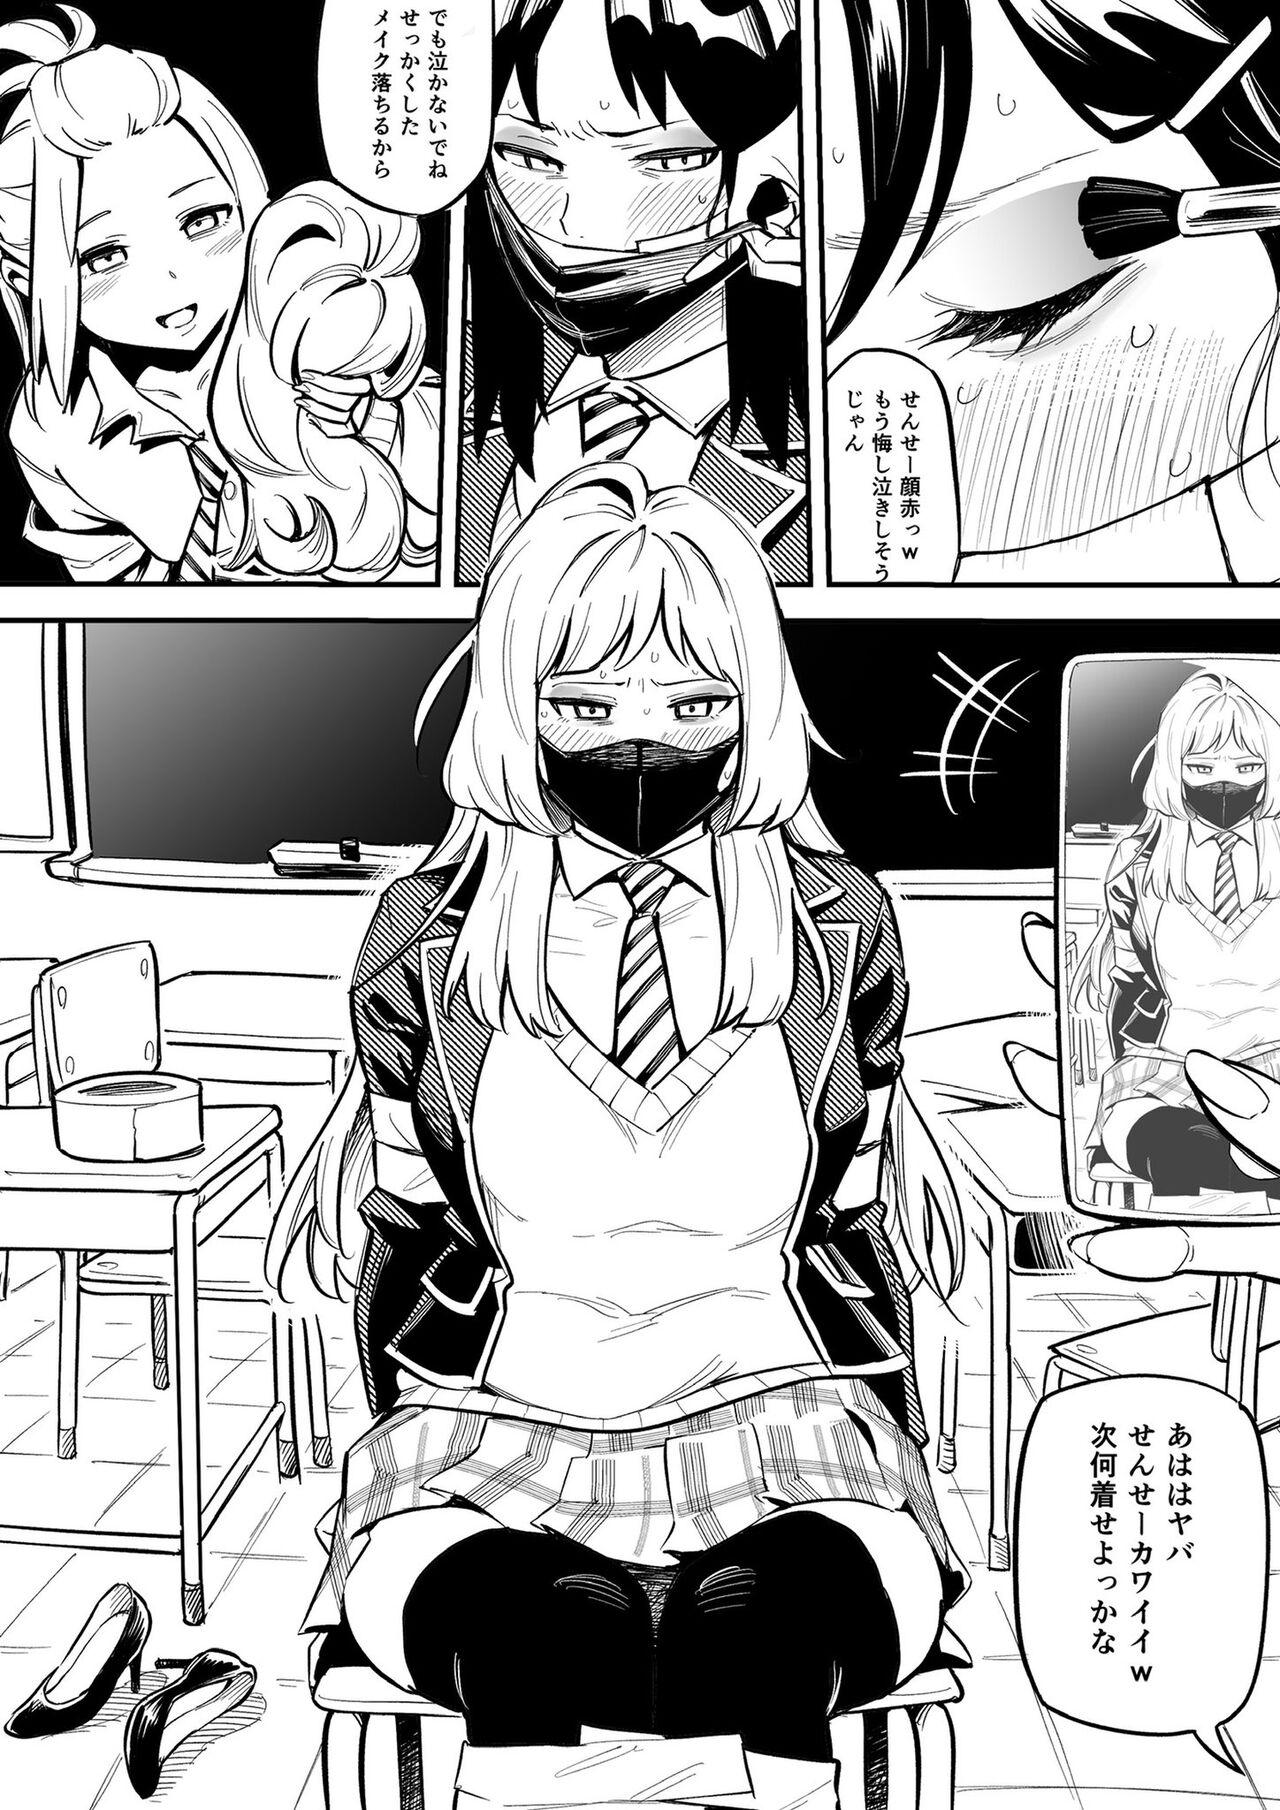 I was asked to draw a humiliating play in which a teacher is disguised as a student! 2